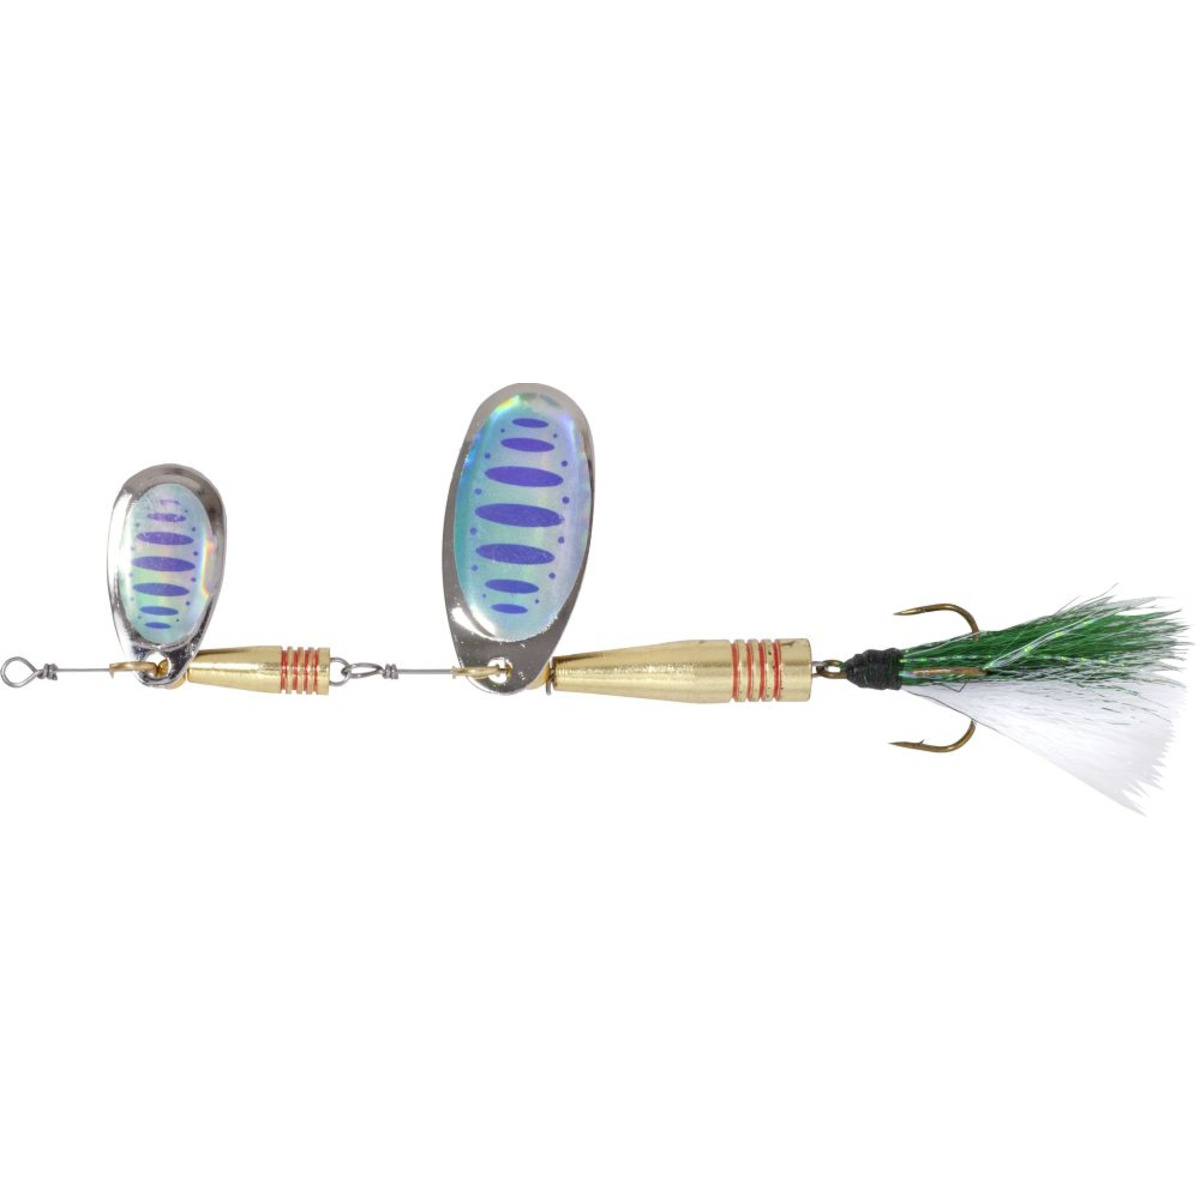 Zebco Waterwings Double Blade - 10 g - green/blue